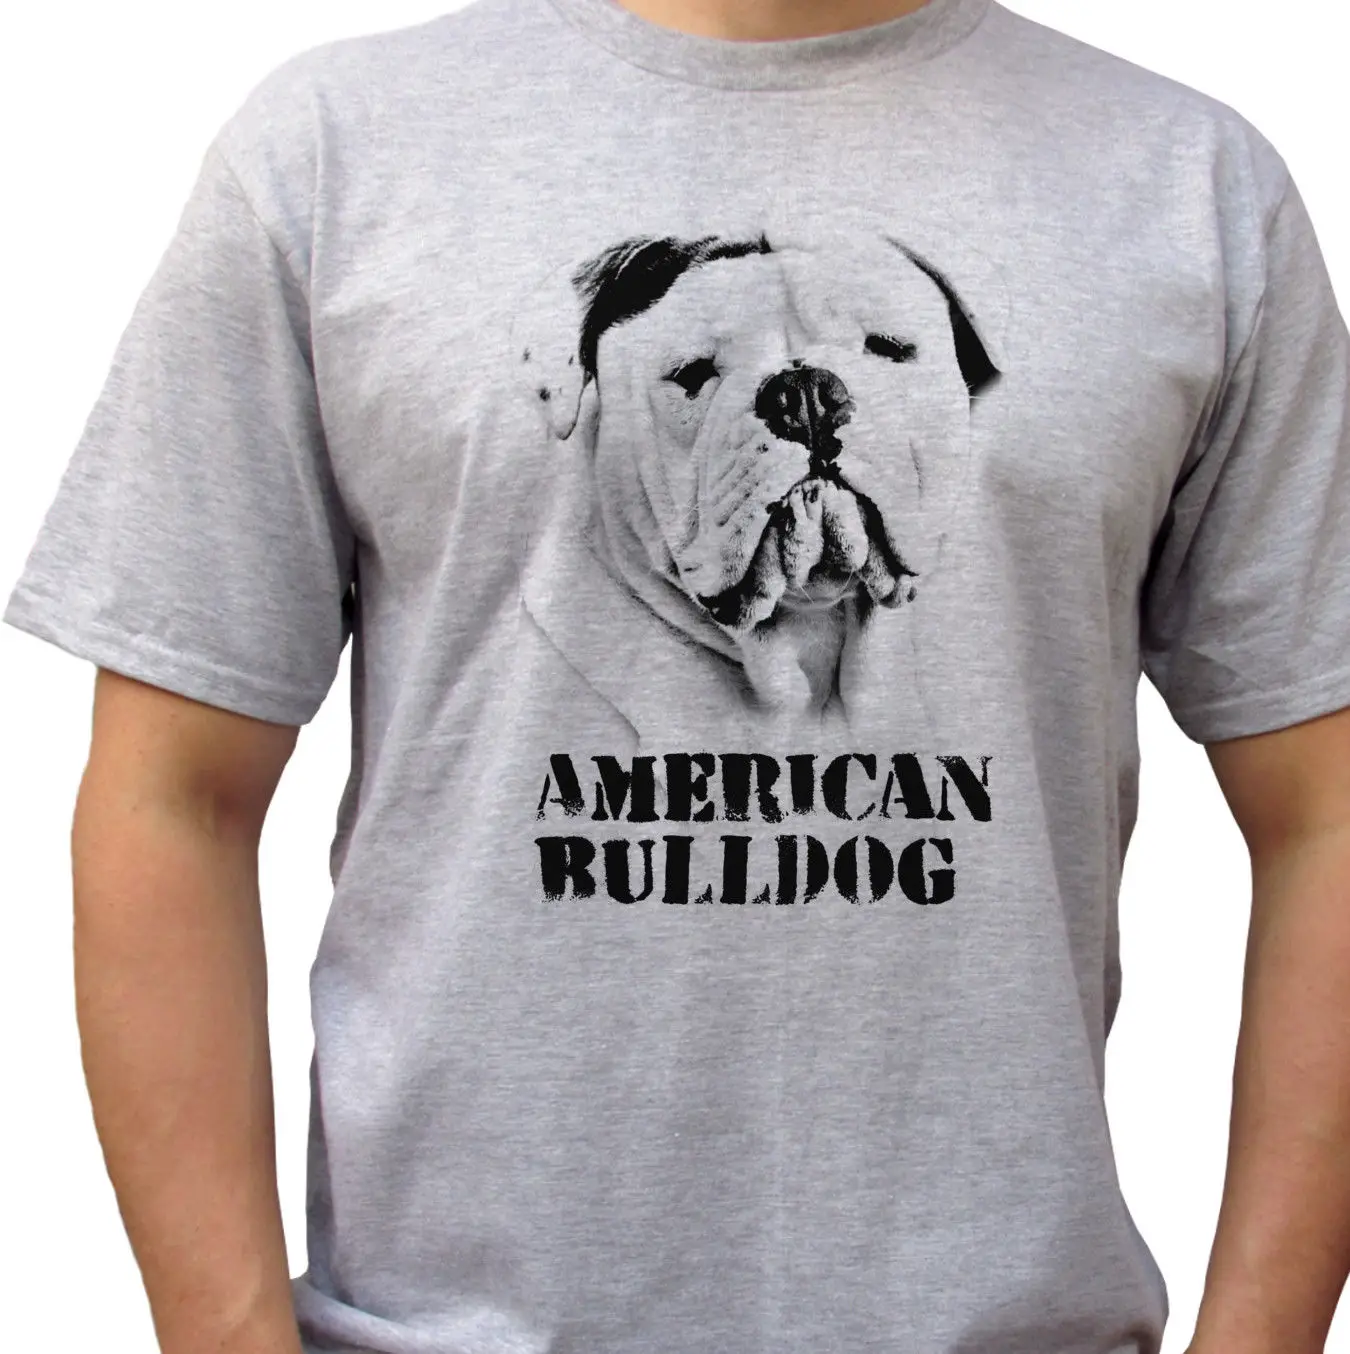 Amazing Bulldog T Shirts in the world The ultimate guide | bulldogs